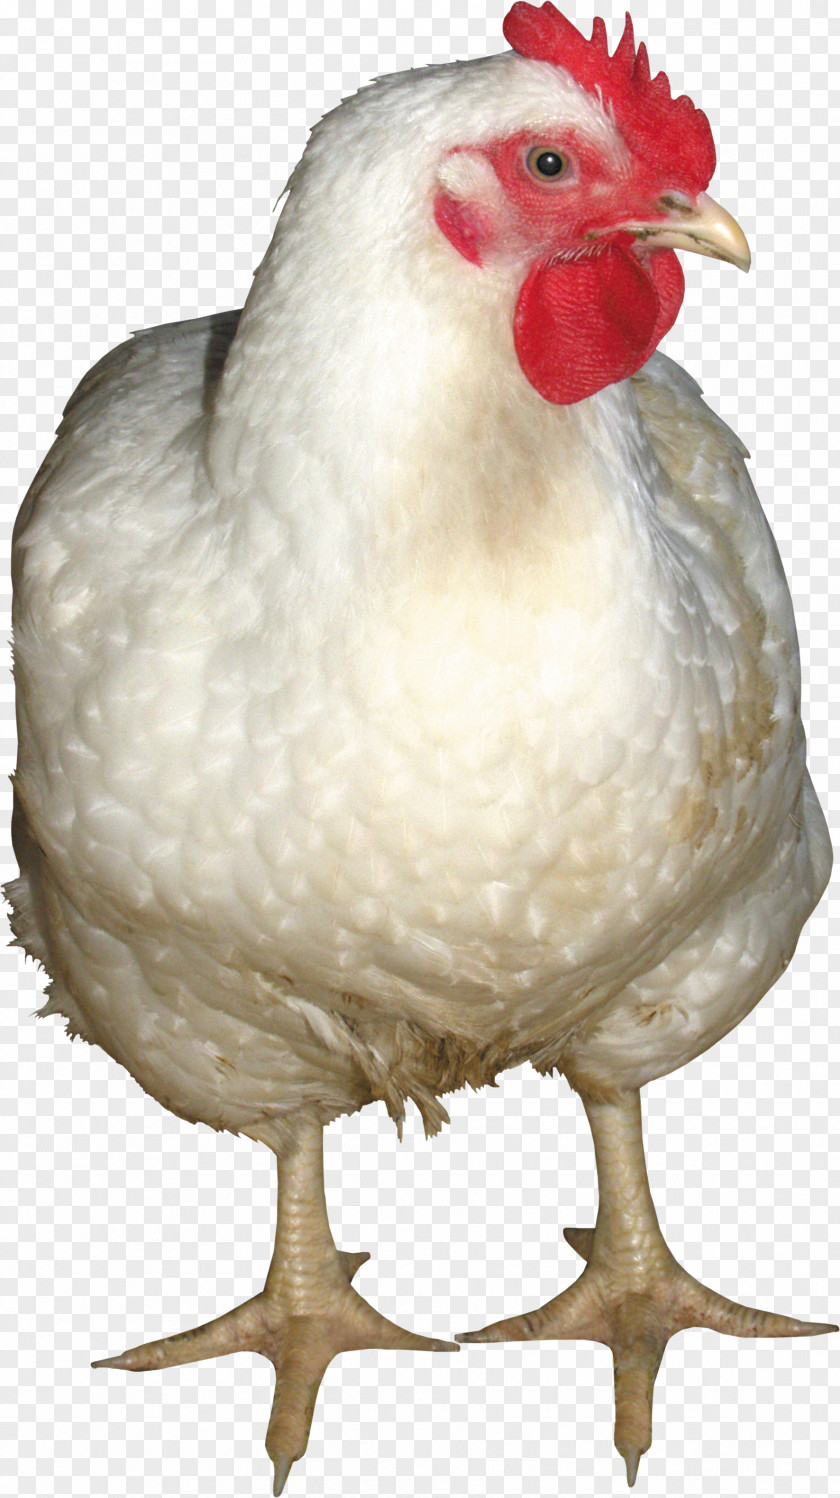 White Chicken Image Fried Meat Salad PNG